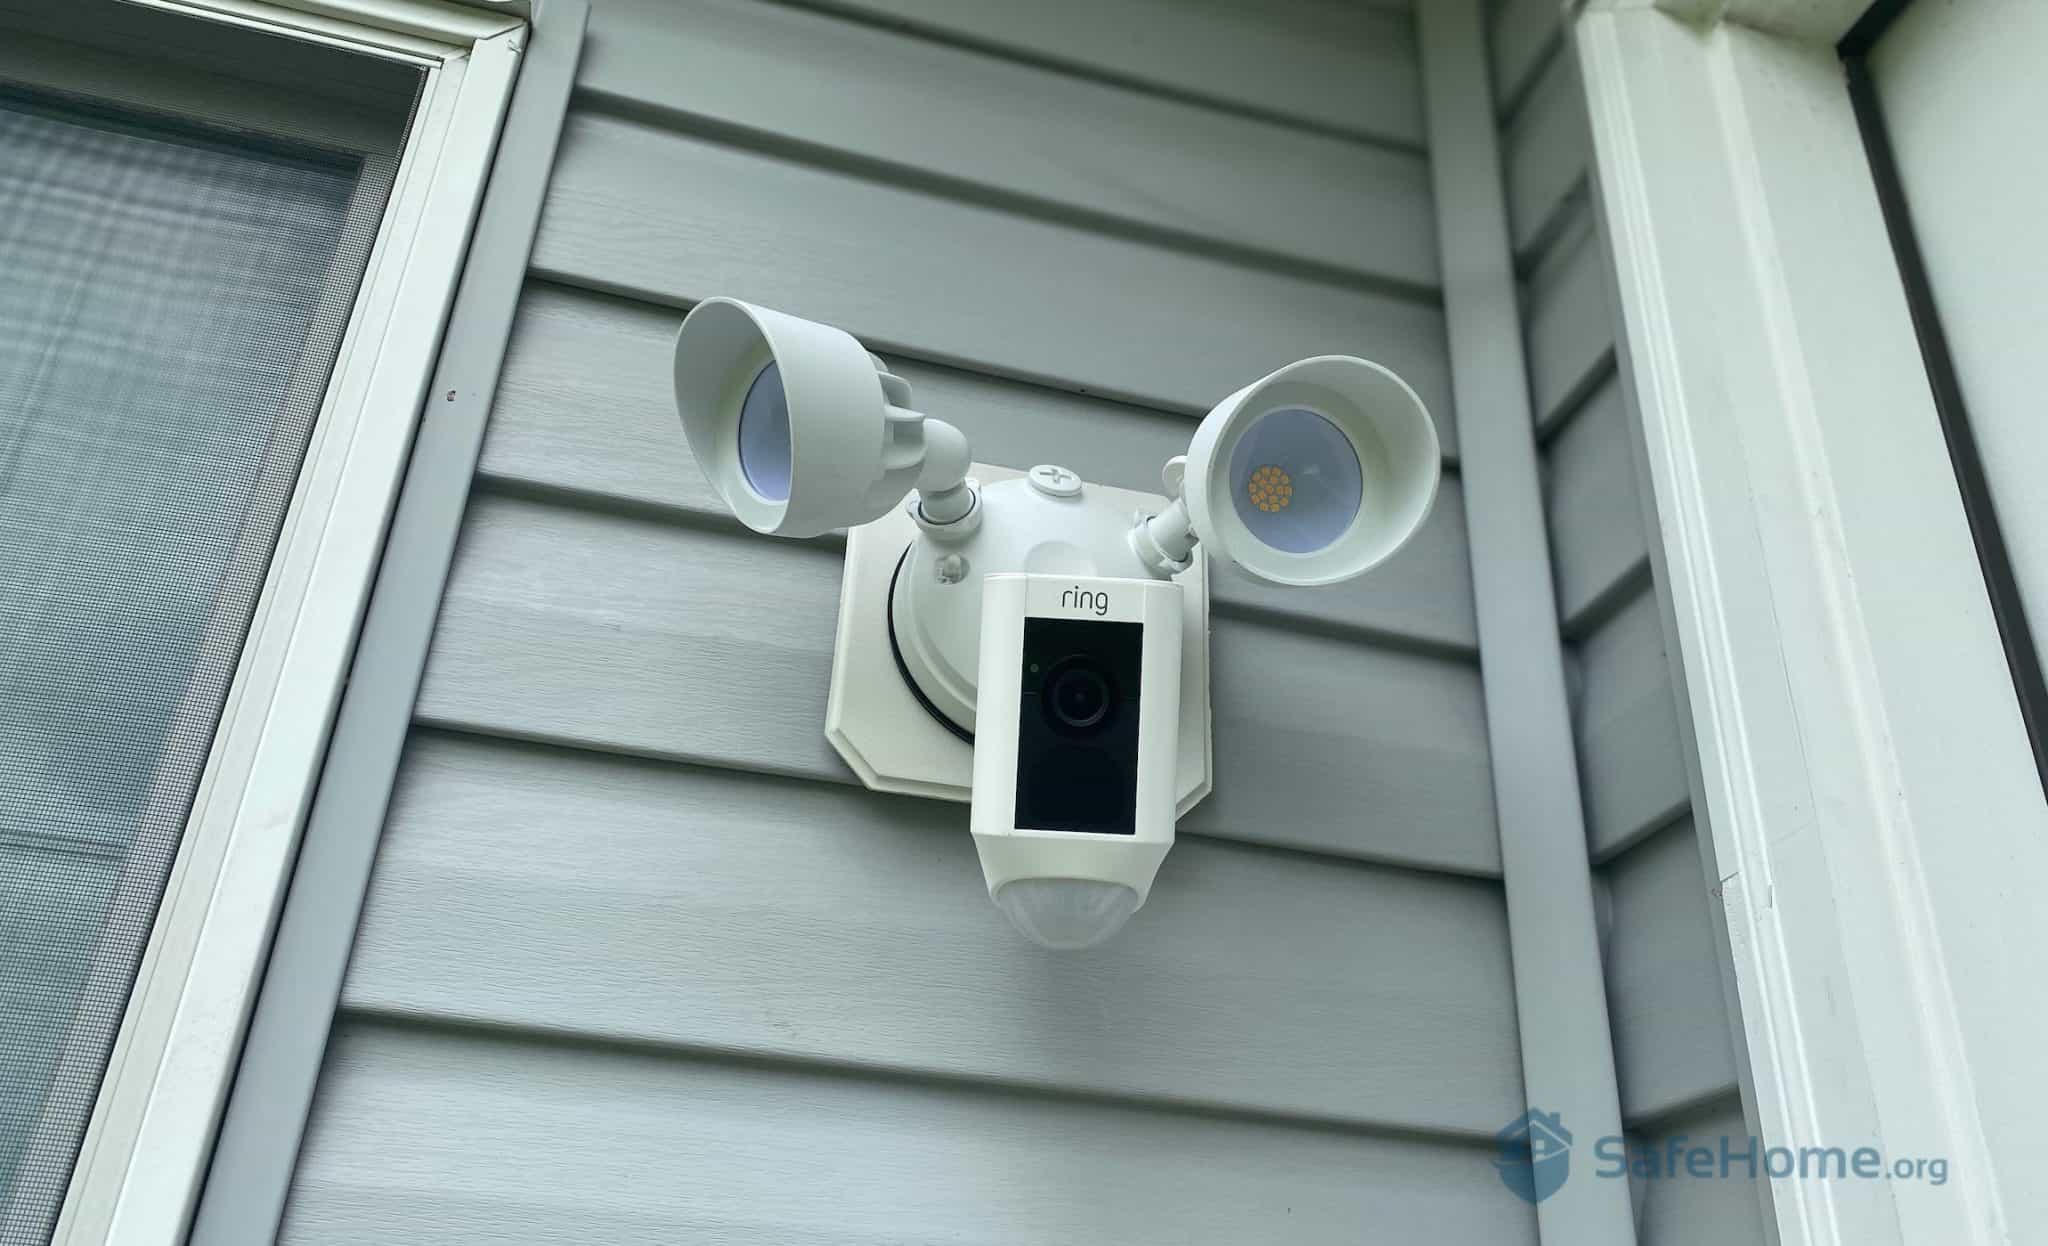 Ring Home Security Camera Cost And Pricing Plans In 2022 